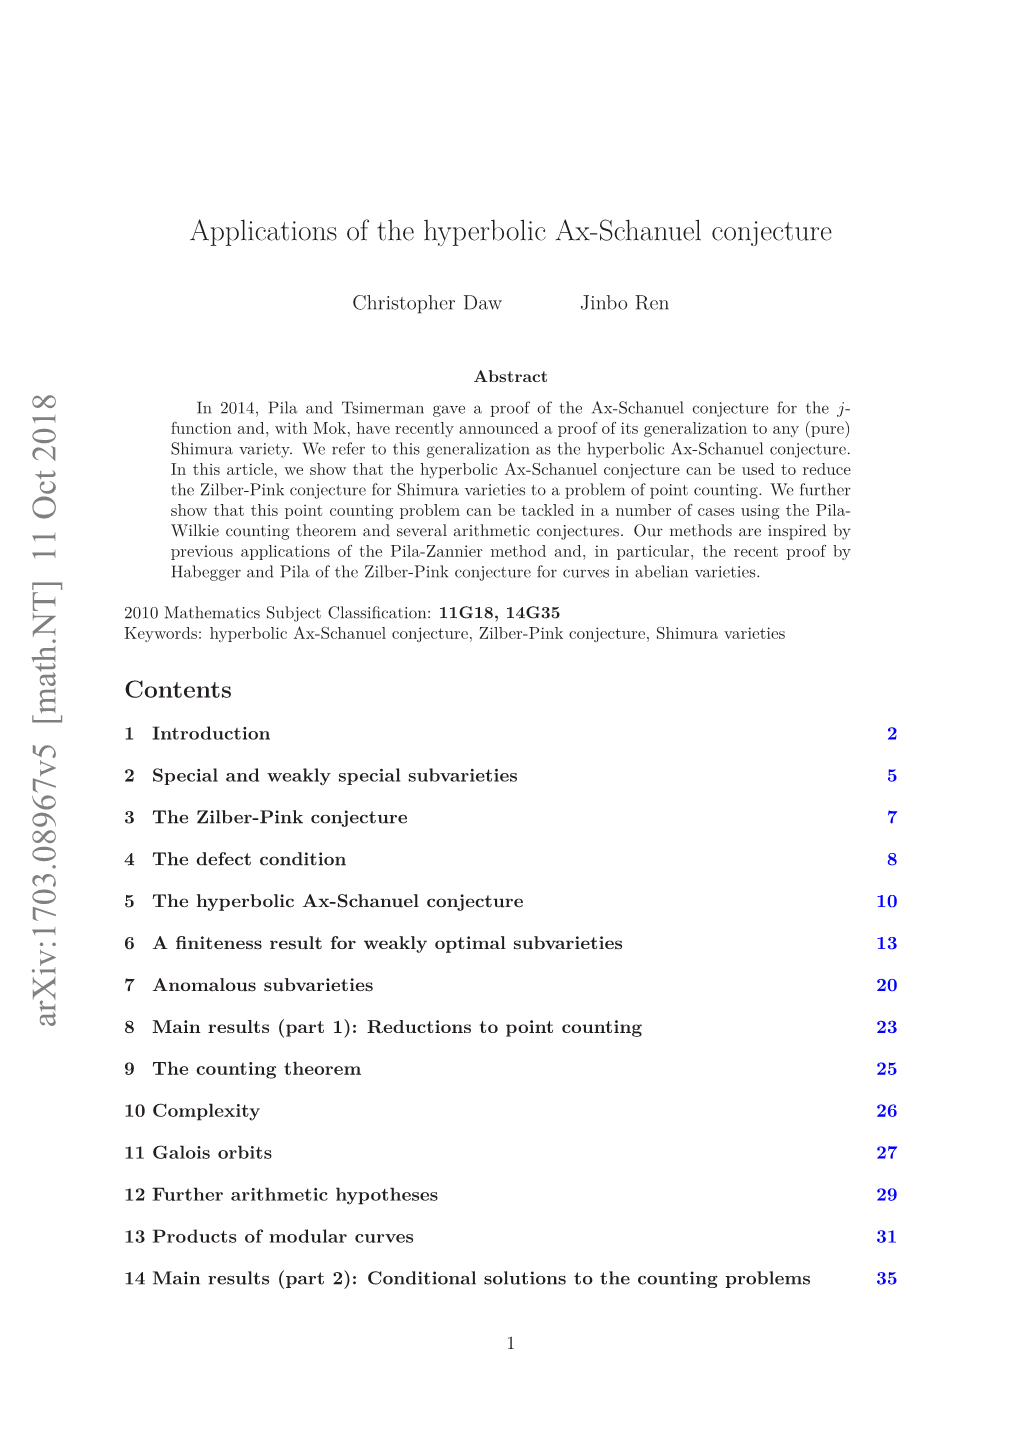 Applications of the Hyperbolic Ax-Schanuel Conjecture